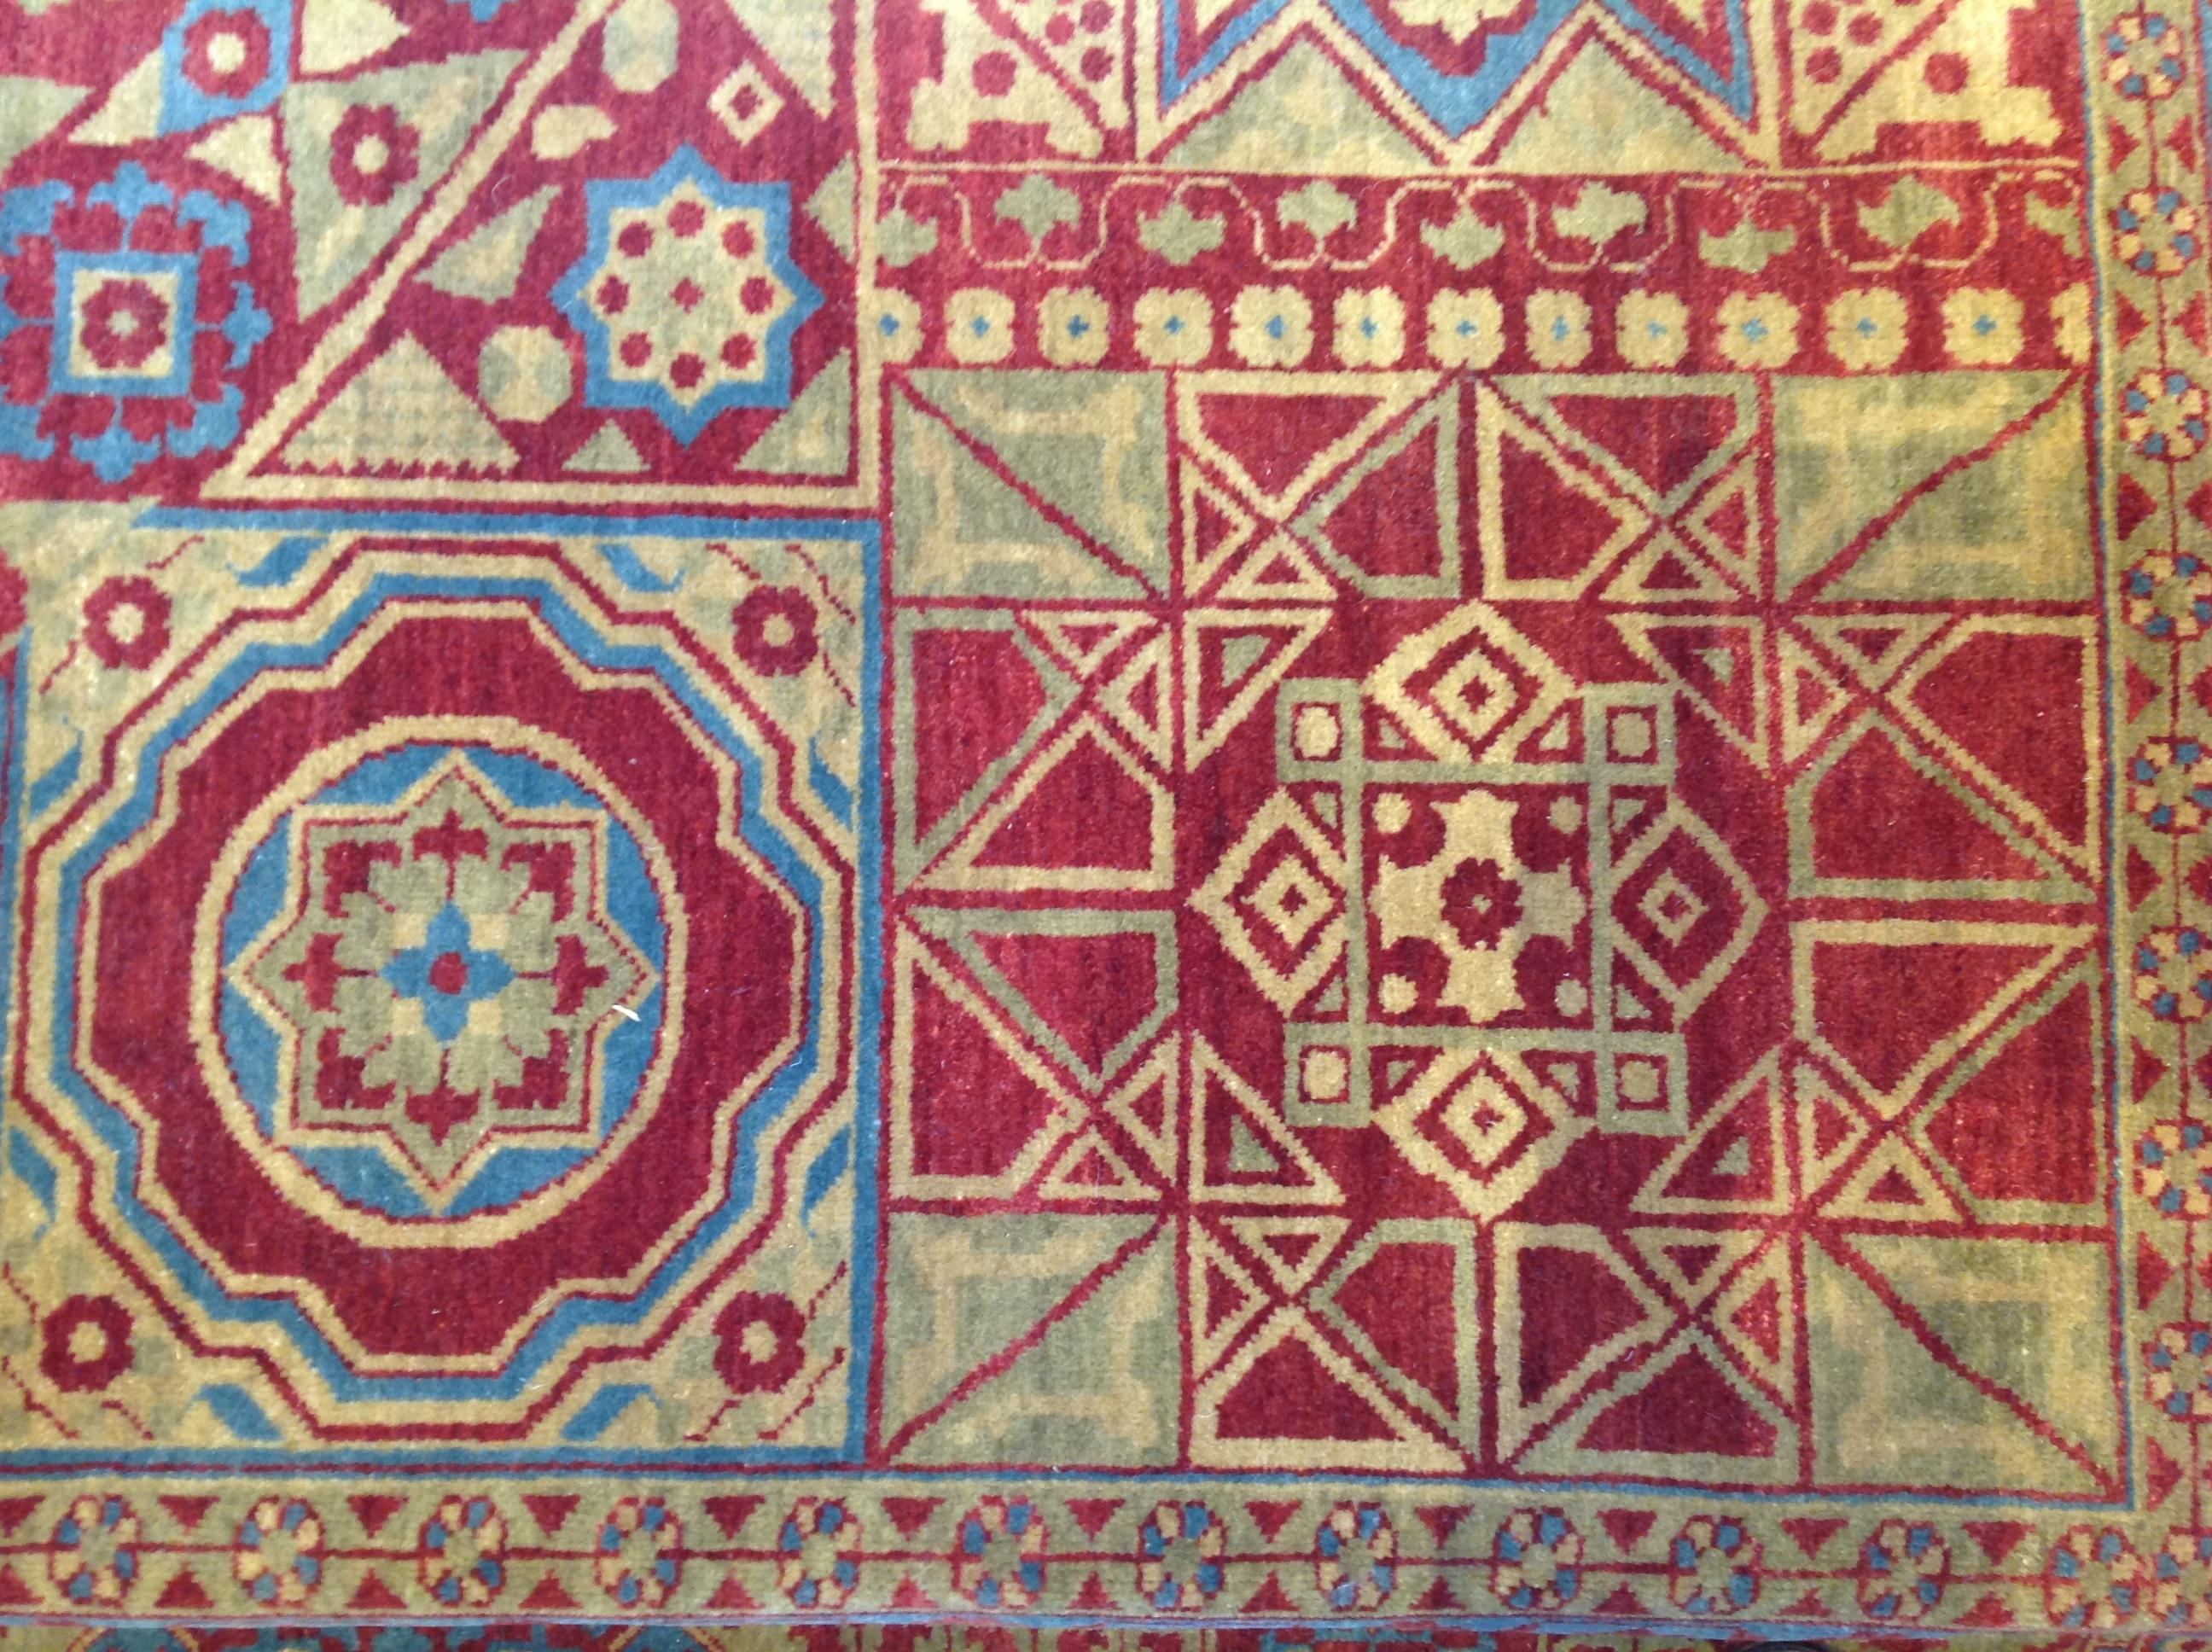 For centuries Mamluk rugs have been known by their distinctive geometric designs and this contemporary Indian-made example is no exception. A variety of shapes in deep red, dark tuquoise blue, dark gold and green come together to create an